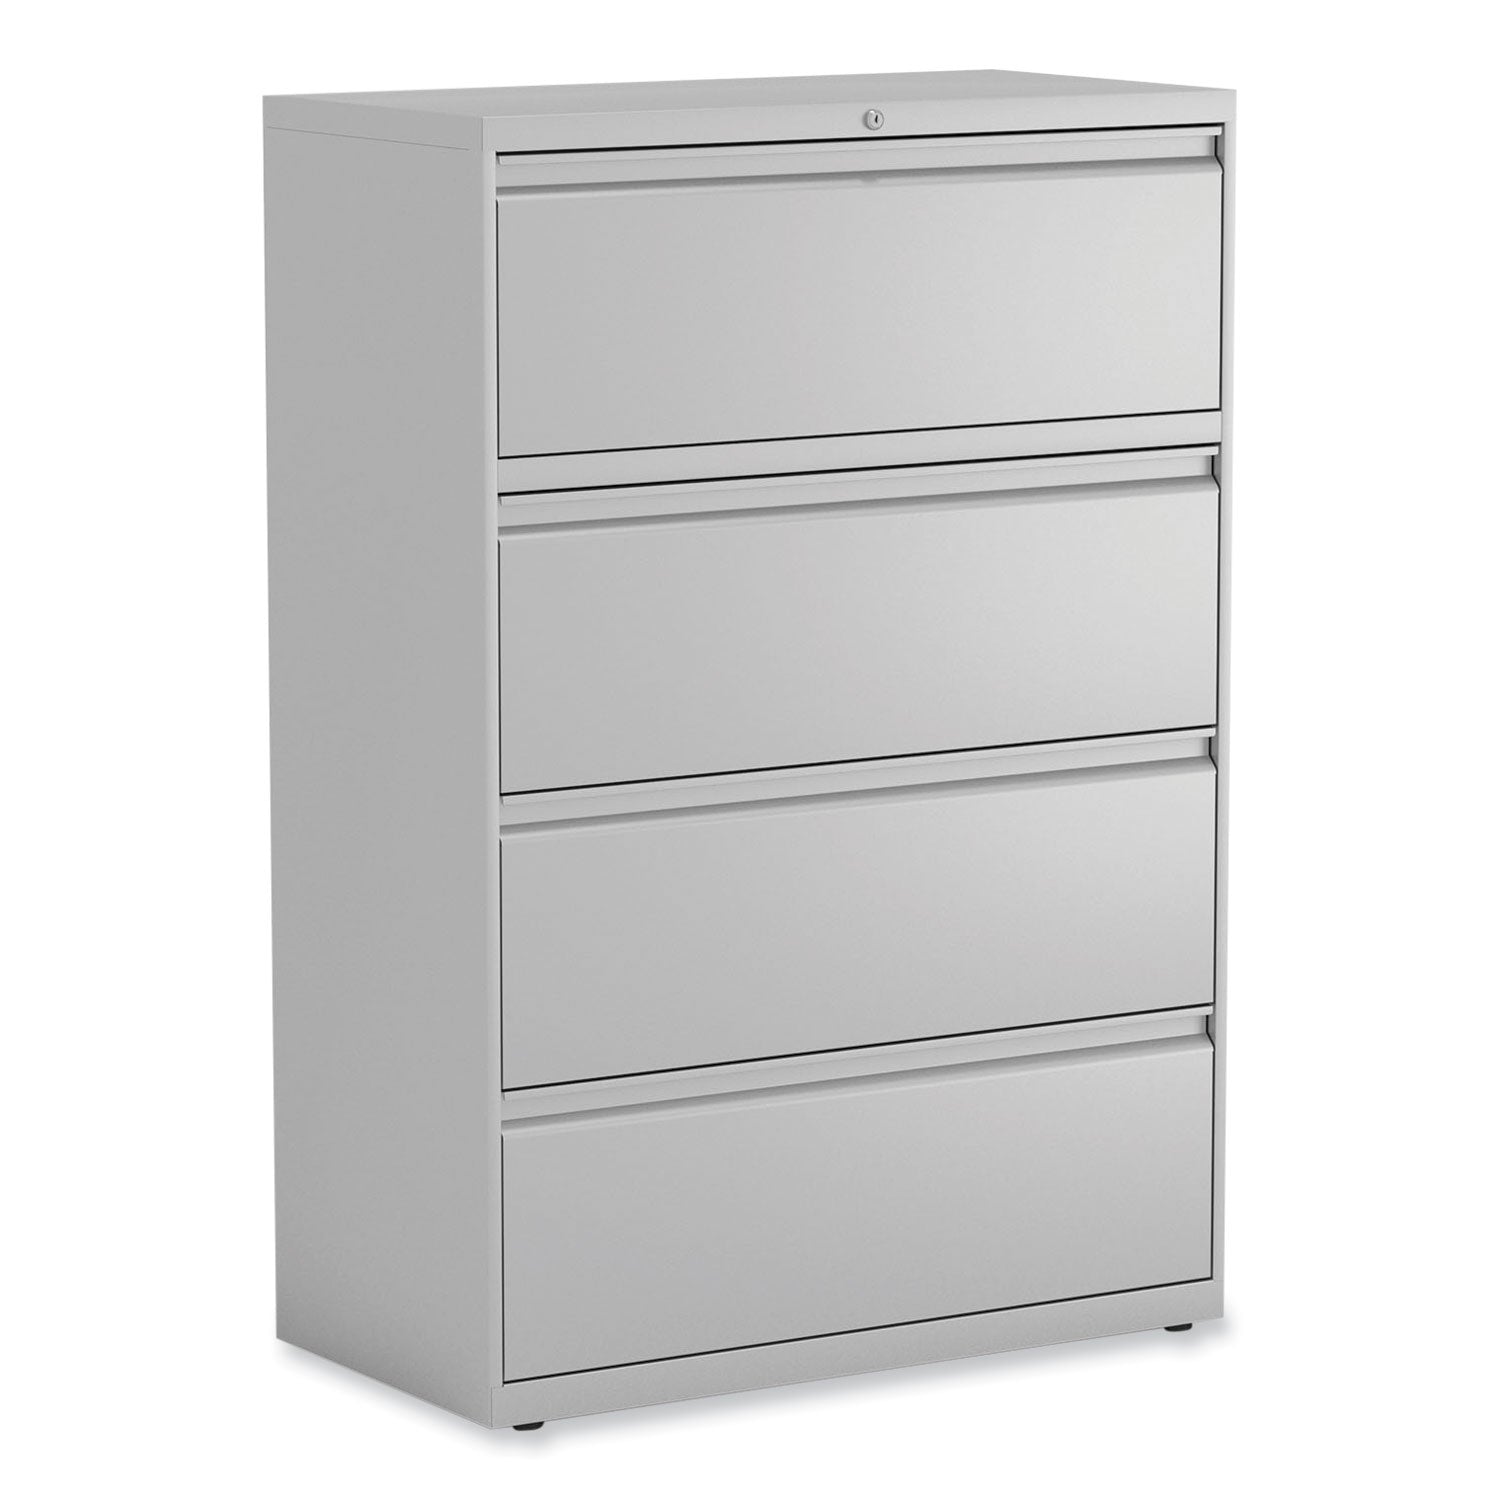 lateral-file-4-legal-letter-size-file-drawers-light-gray-36-x-1863-x-525_alehlf3654lg - 1